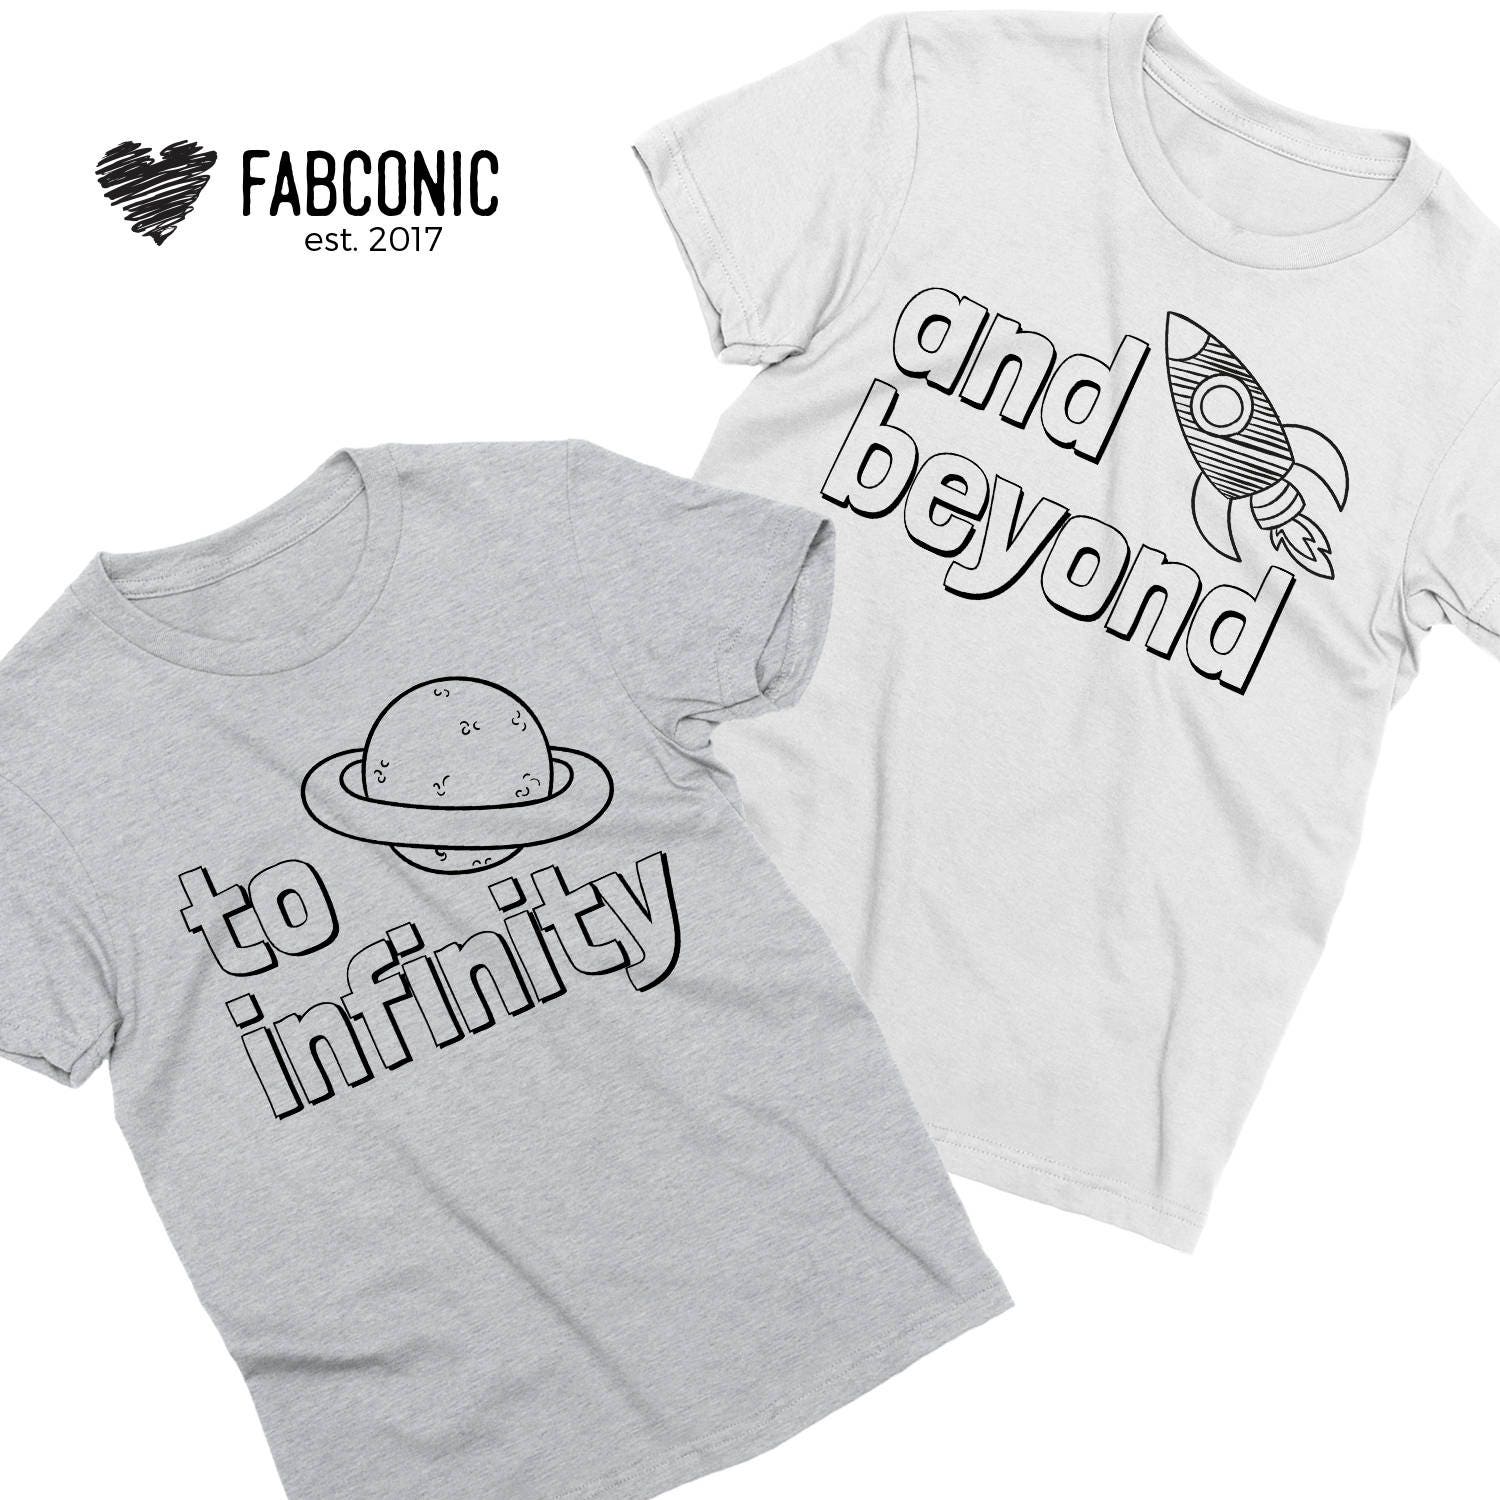 Download Couple shirts To Infinity and Beyond Matching couples